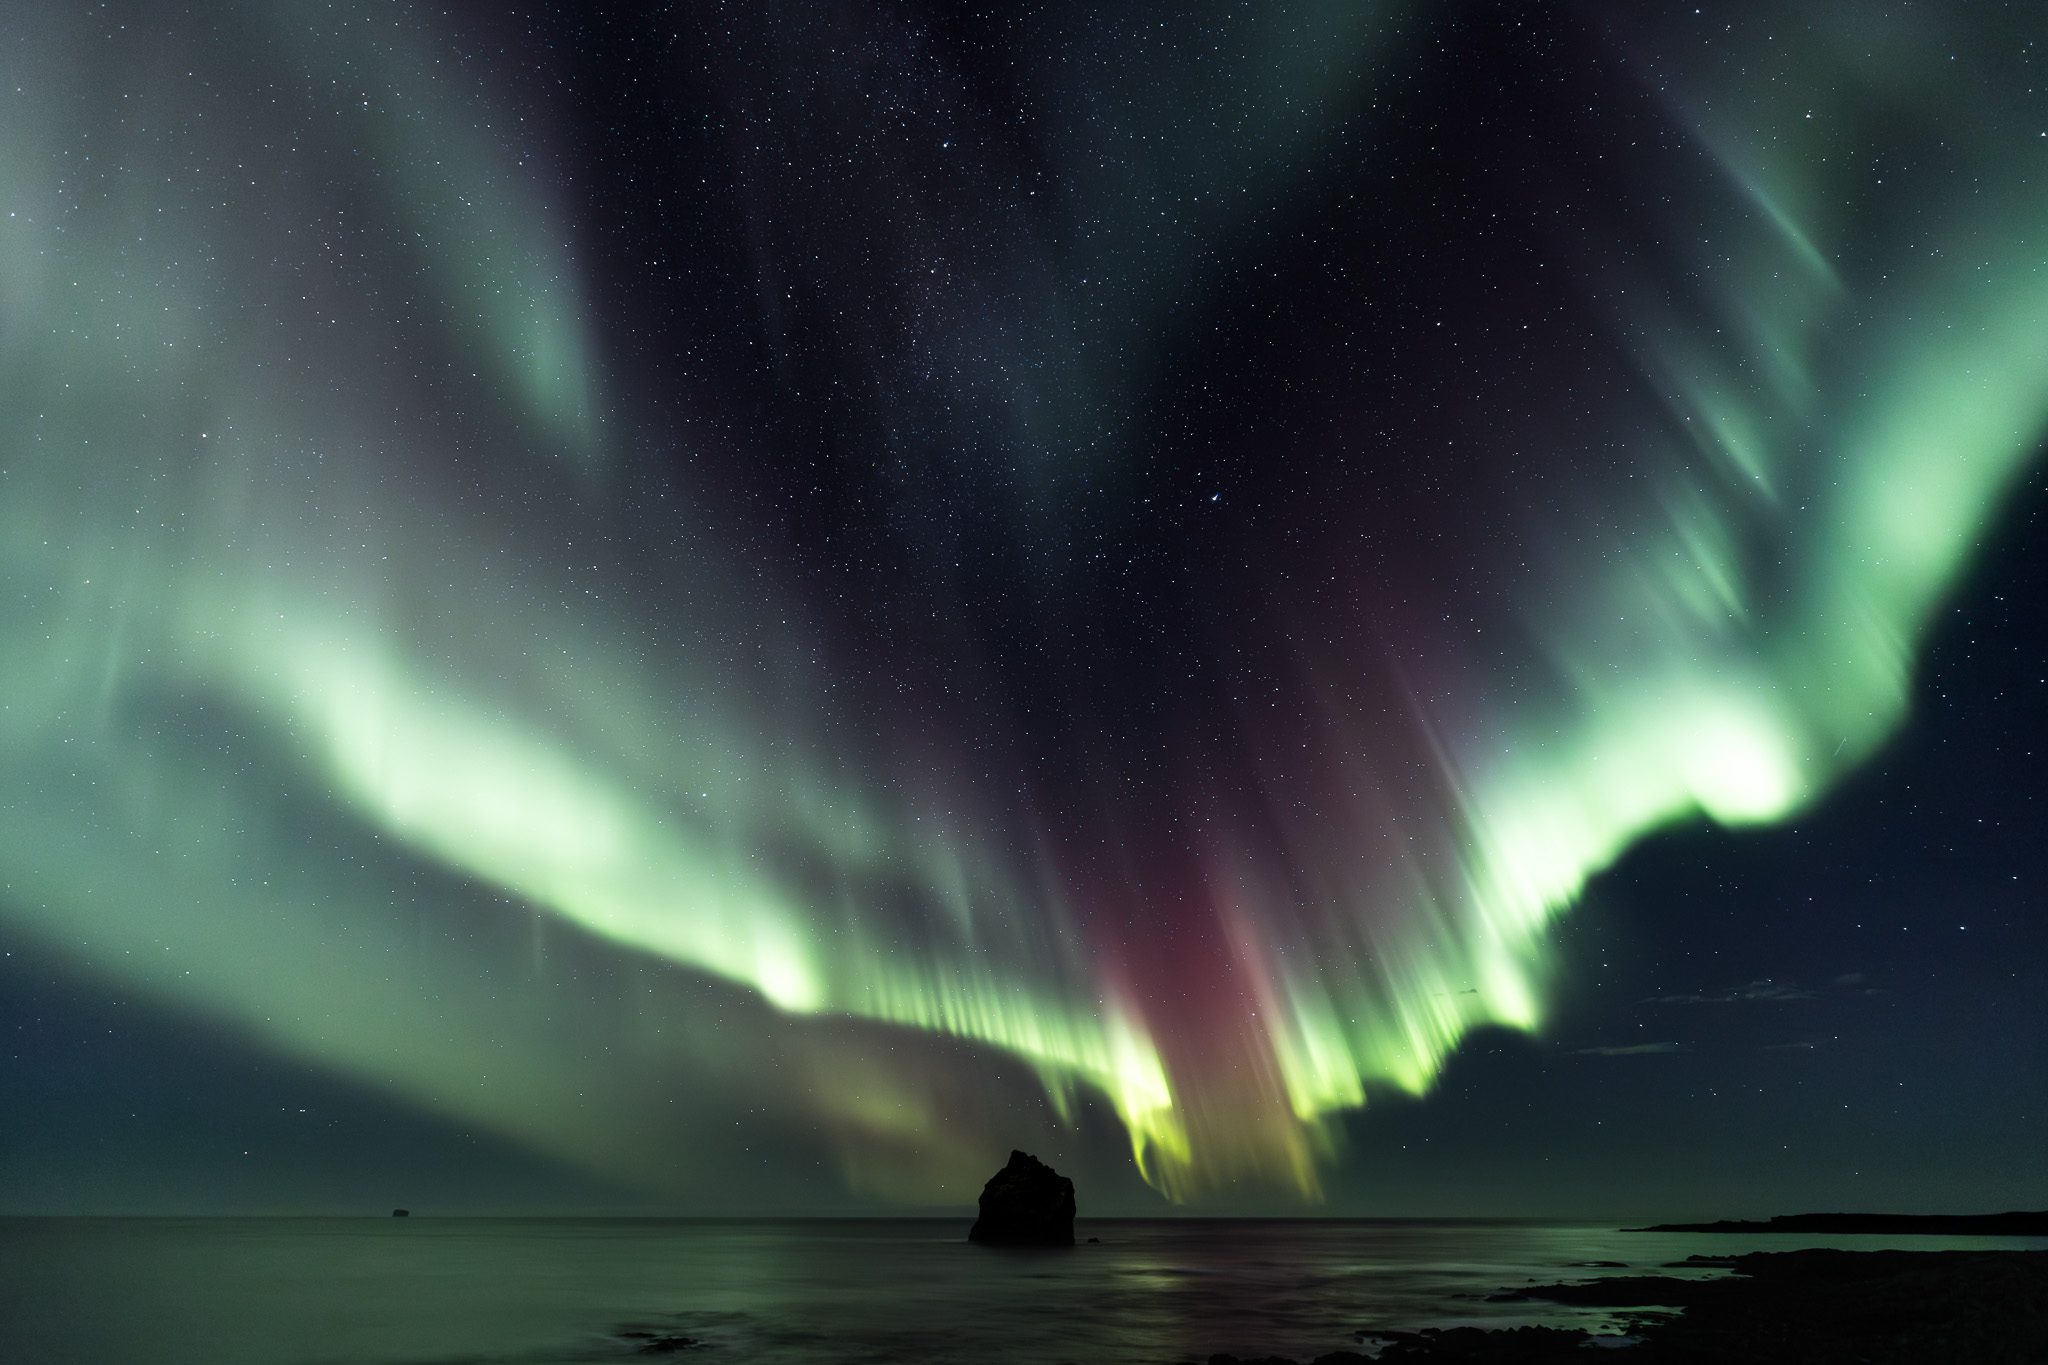 5 Mistakes to Avoid When Photographing the Northern Lights